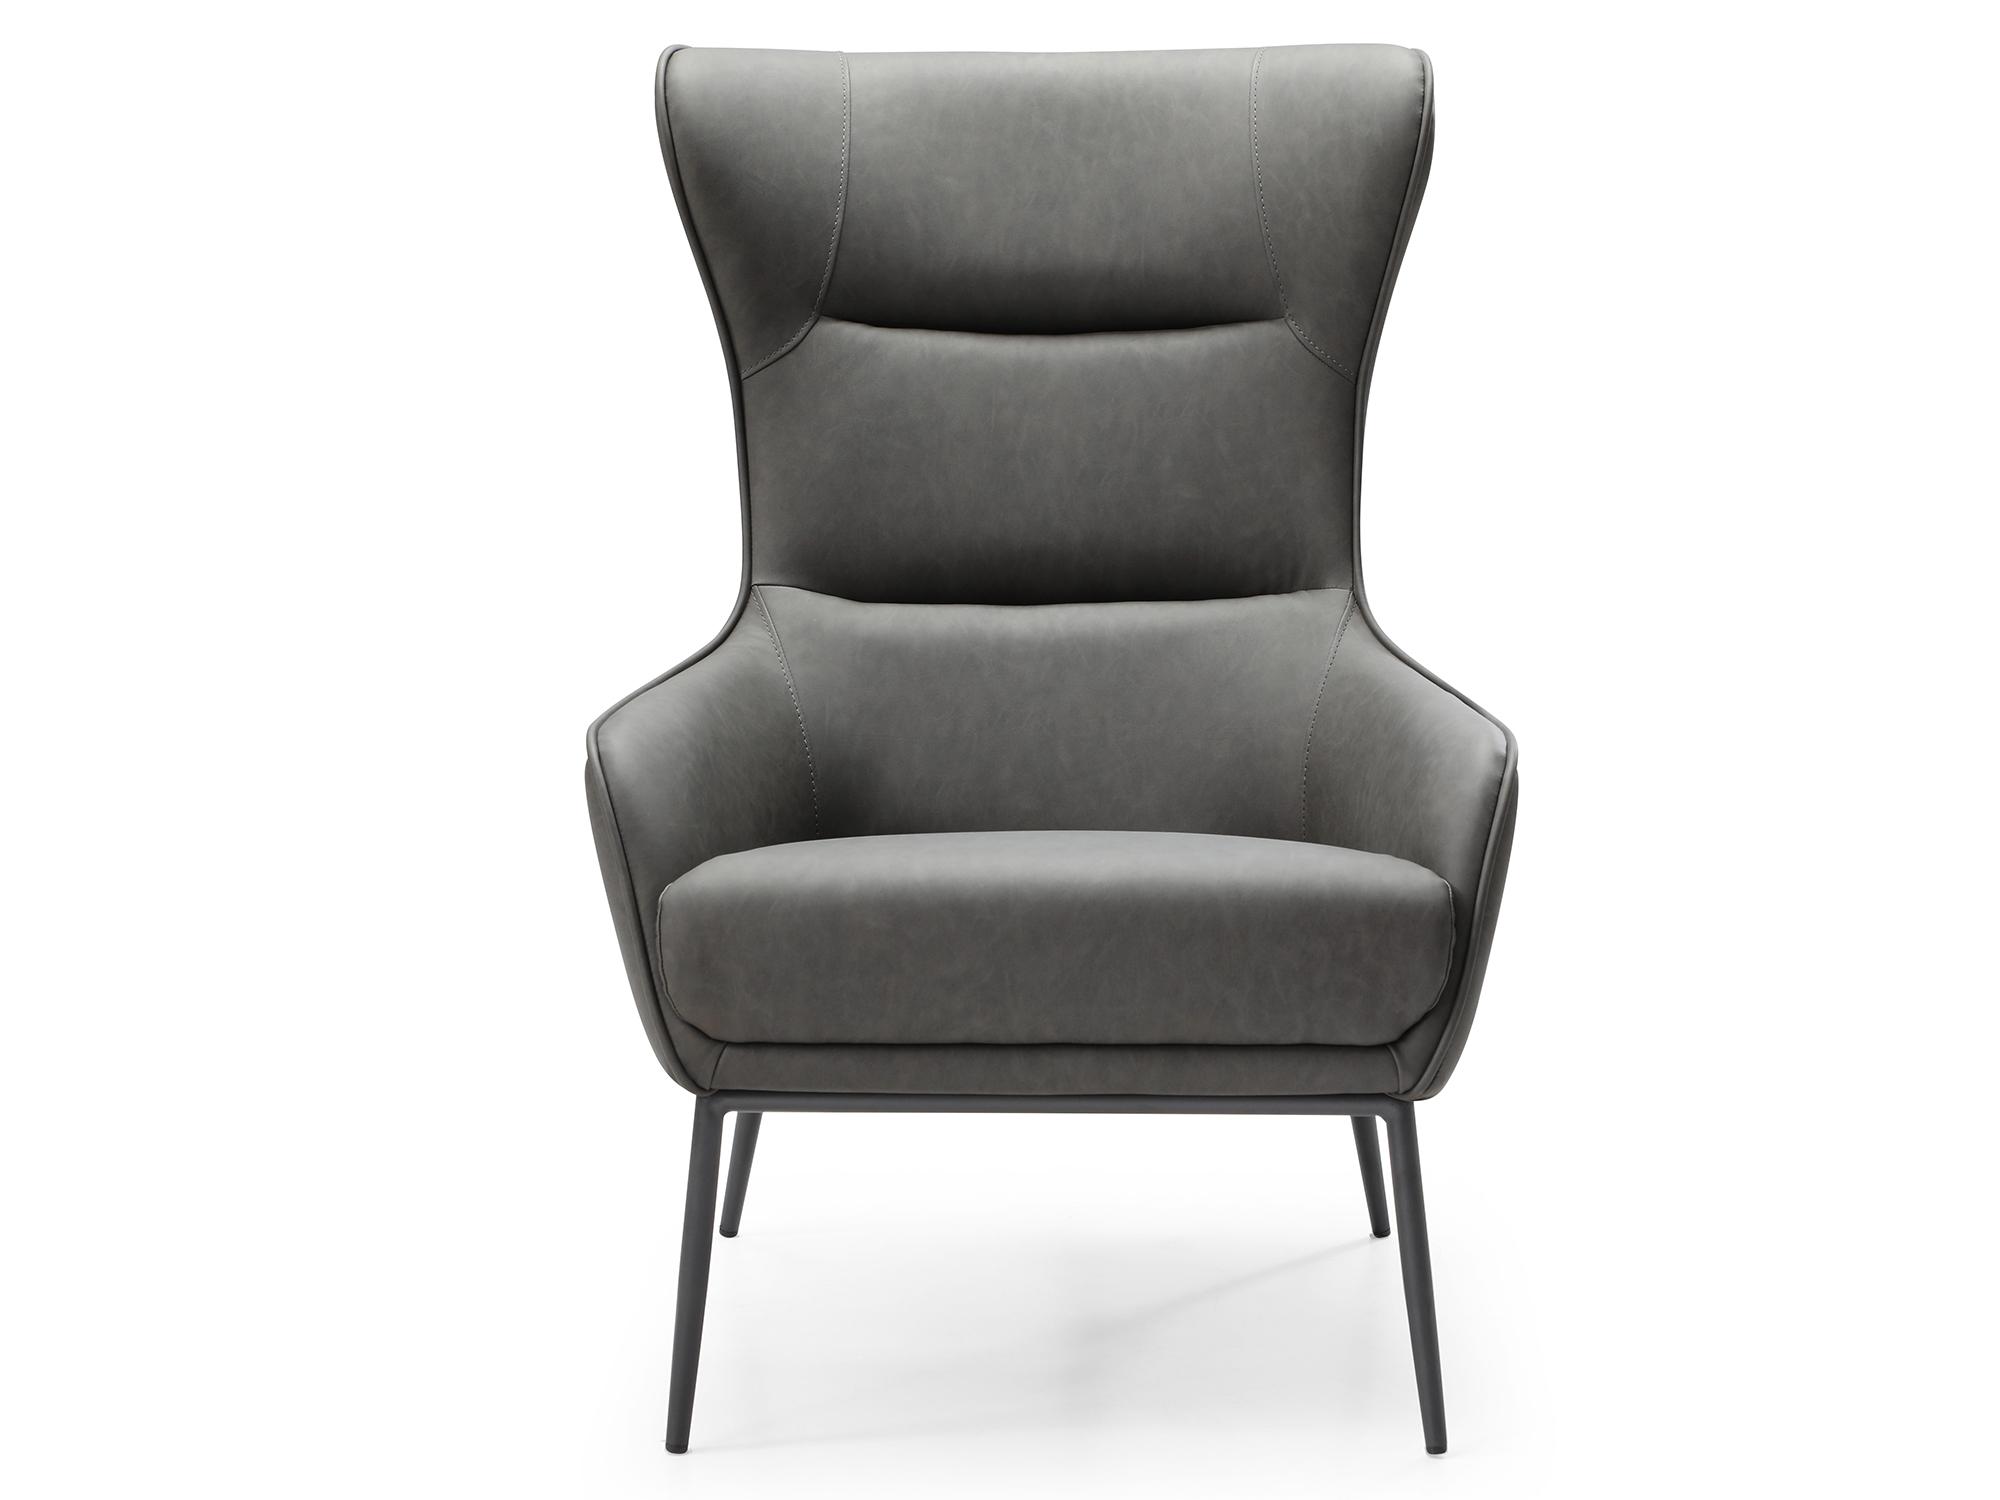 

    
Contemporary Dark Gray Fabric & Faux Leather Chair WhiteLine CH1707P-DGRY Wyatt
